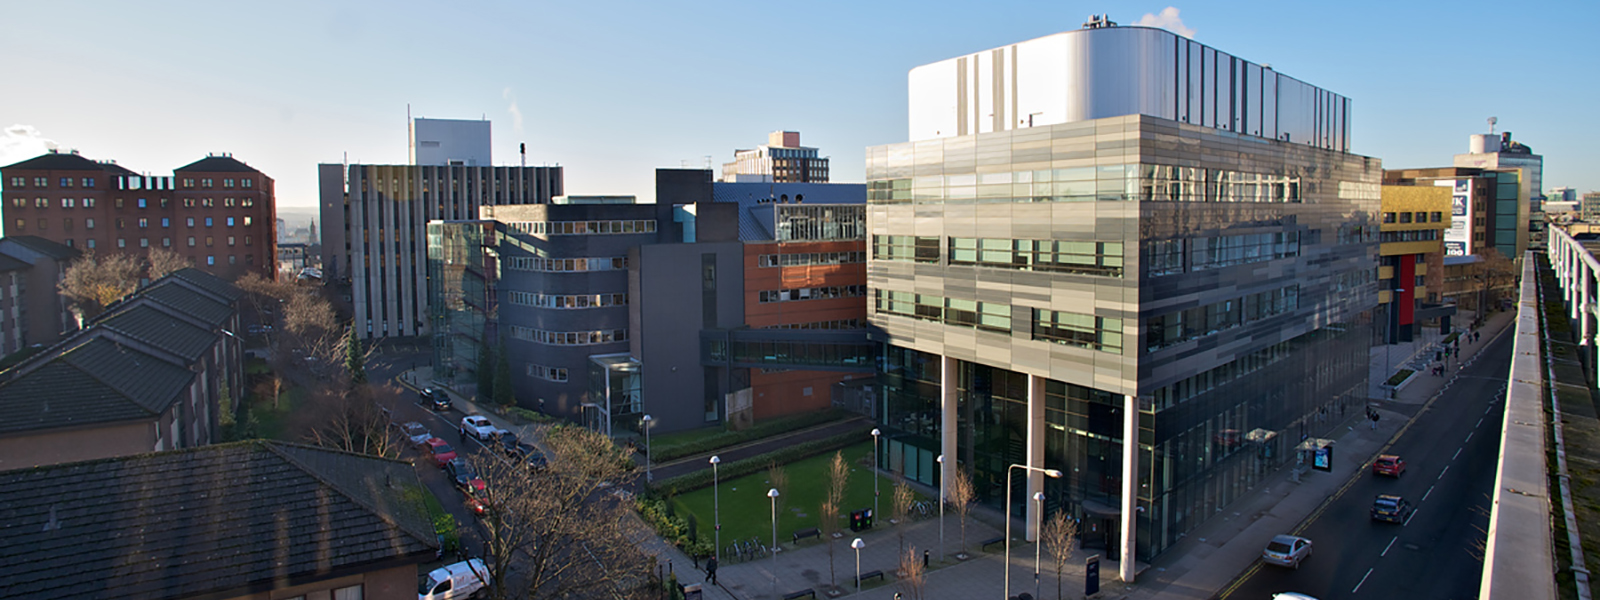 Strathclyde Institute of Pharmacy & Biomedical Sciences building and Cathedral Street